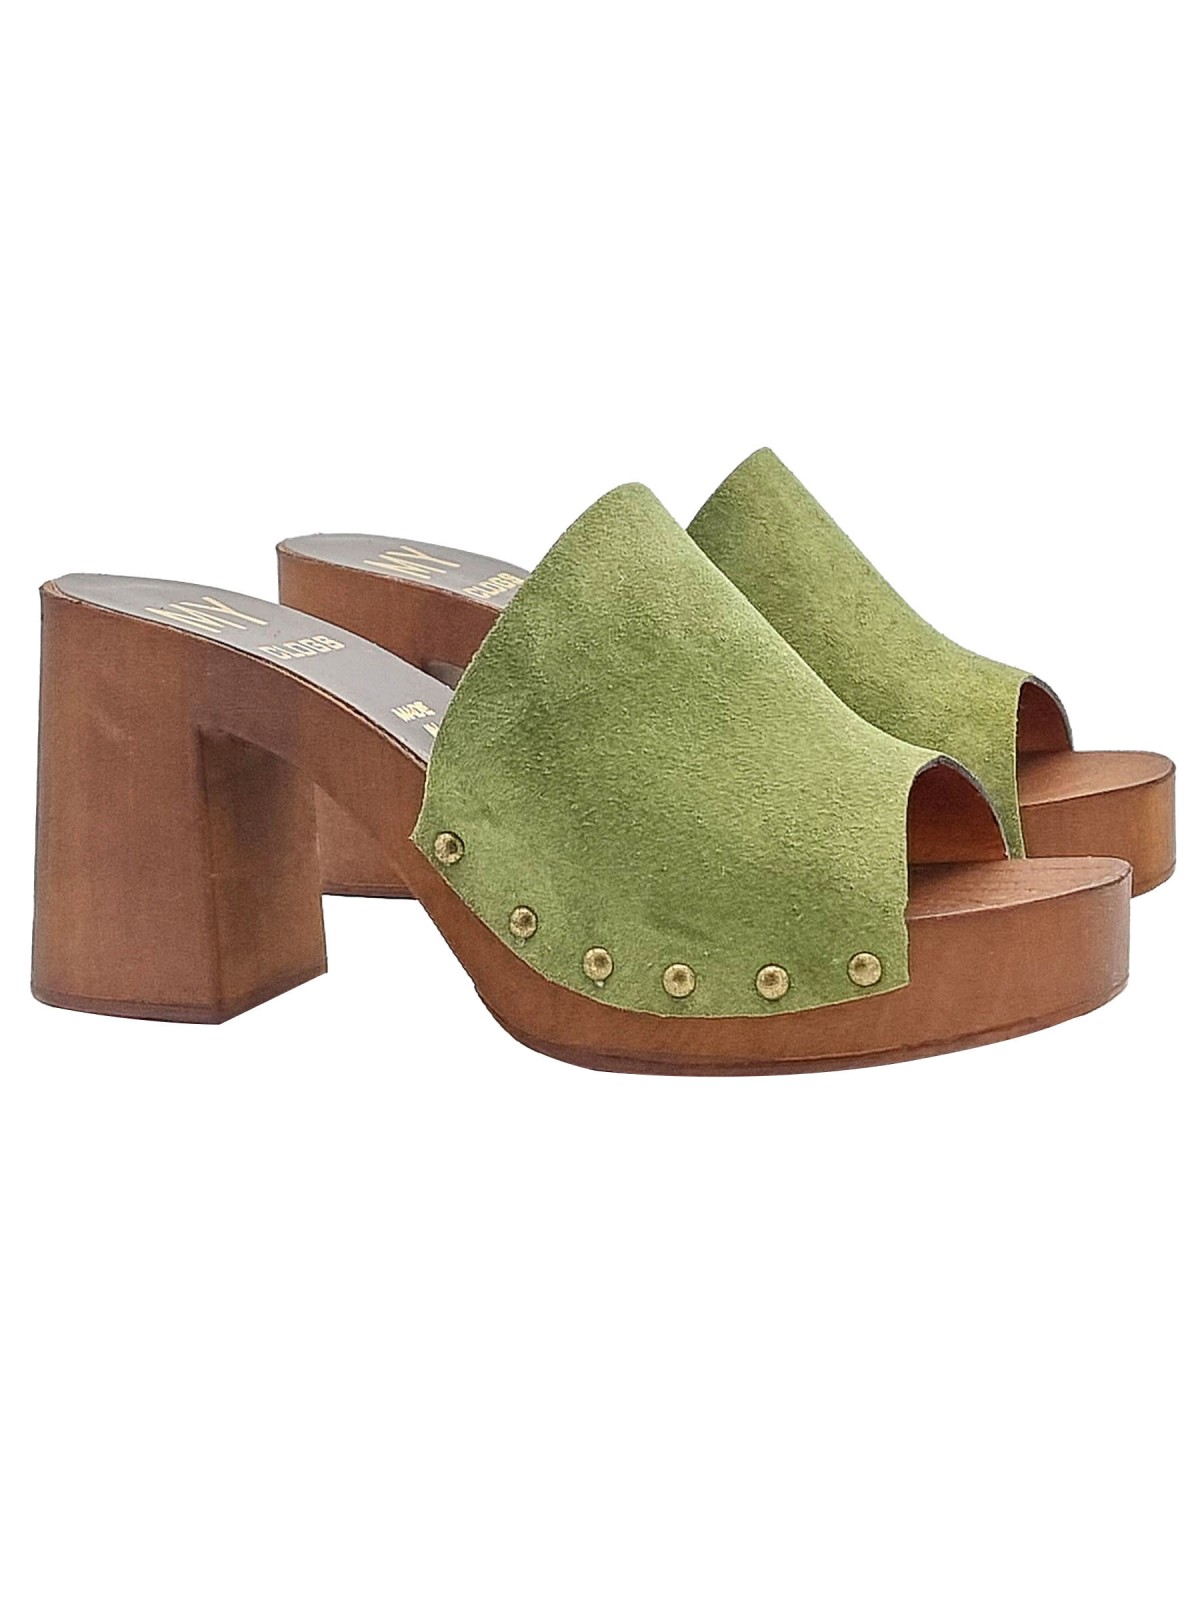 CLOGS IN GREEN SUEDE WITH HEEL 9